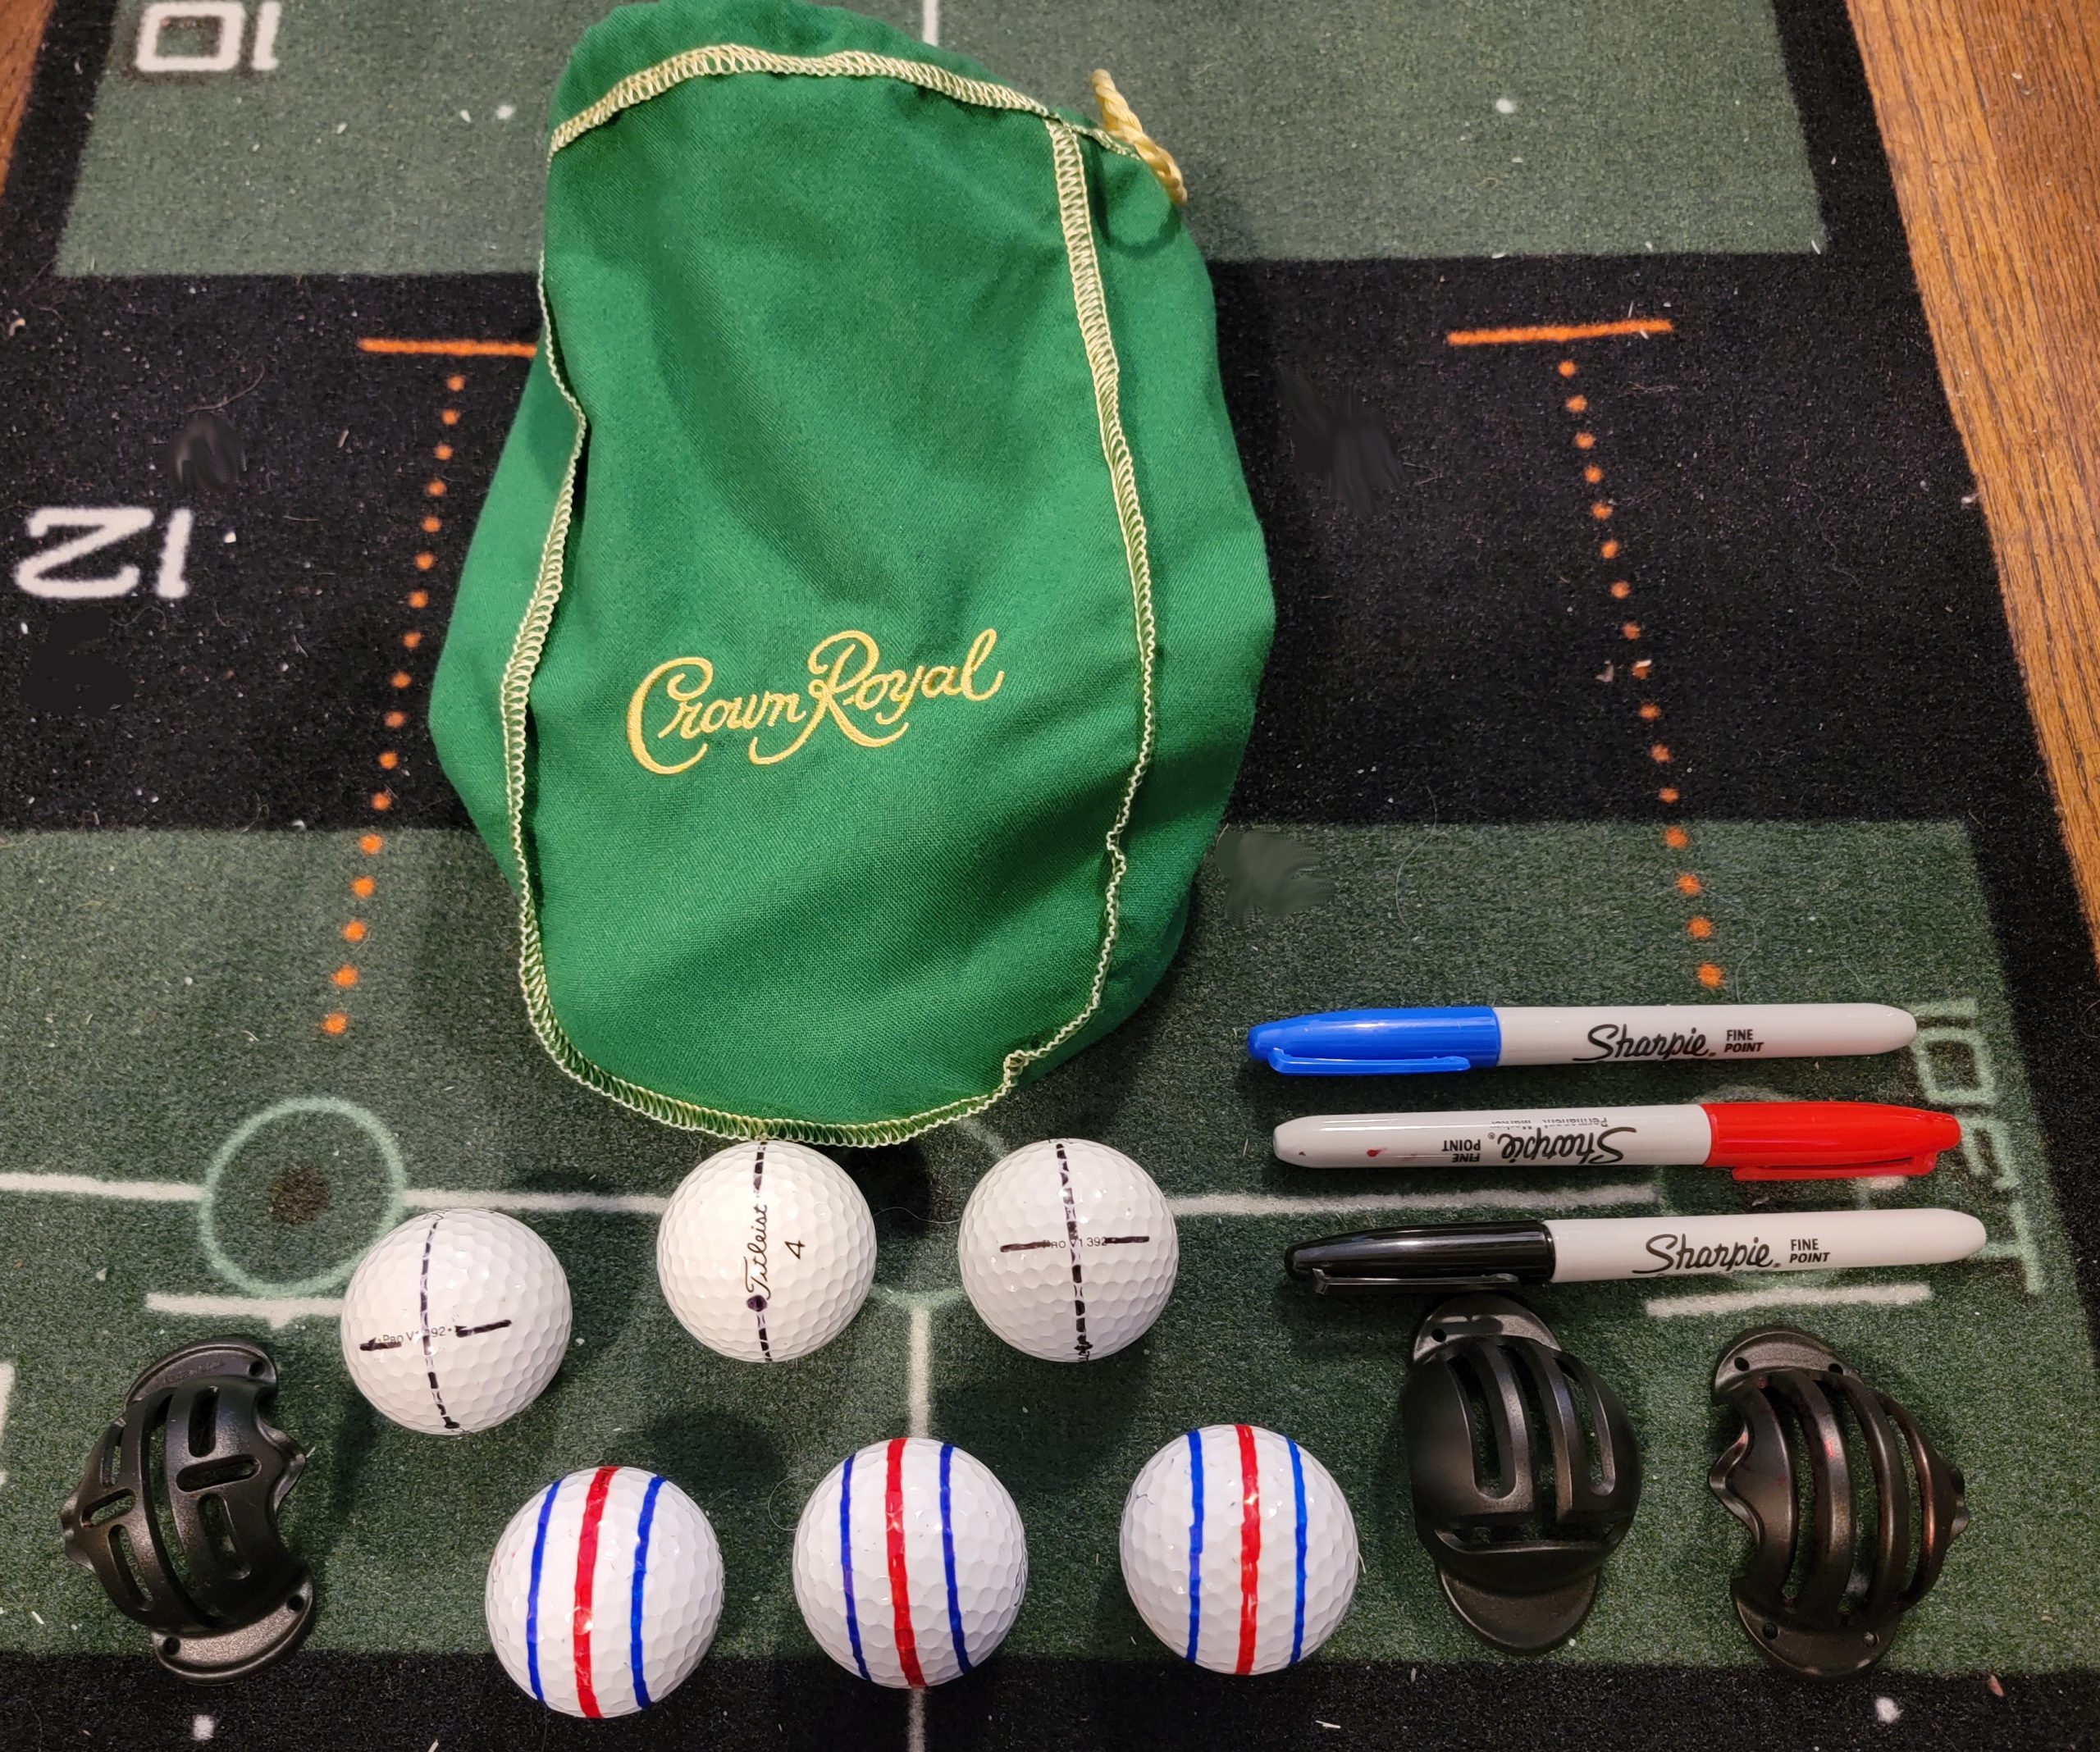 Old Duffer Golf image of lined golf balls for Indoor Golf Drills: Face Angle at Impact.